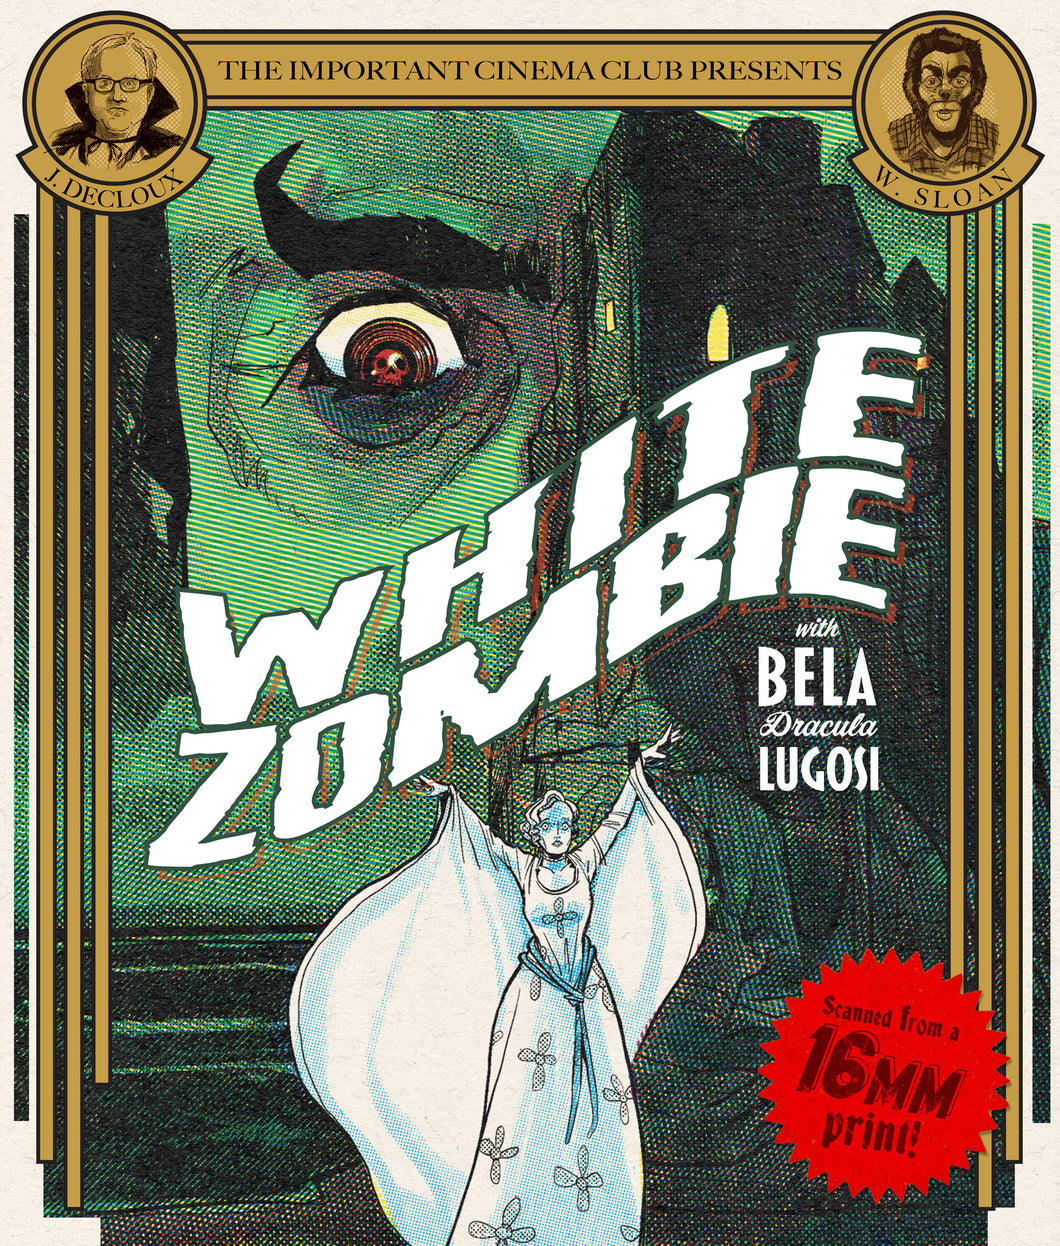 Blu-ray: WHITE ZOMBIE (ON 16MM) Presented by The Important Cinema Club (LIMITED EDITION)